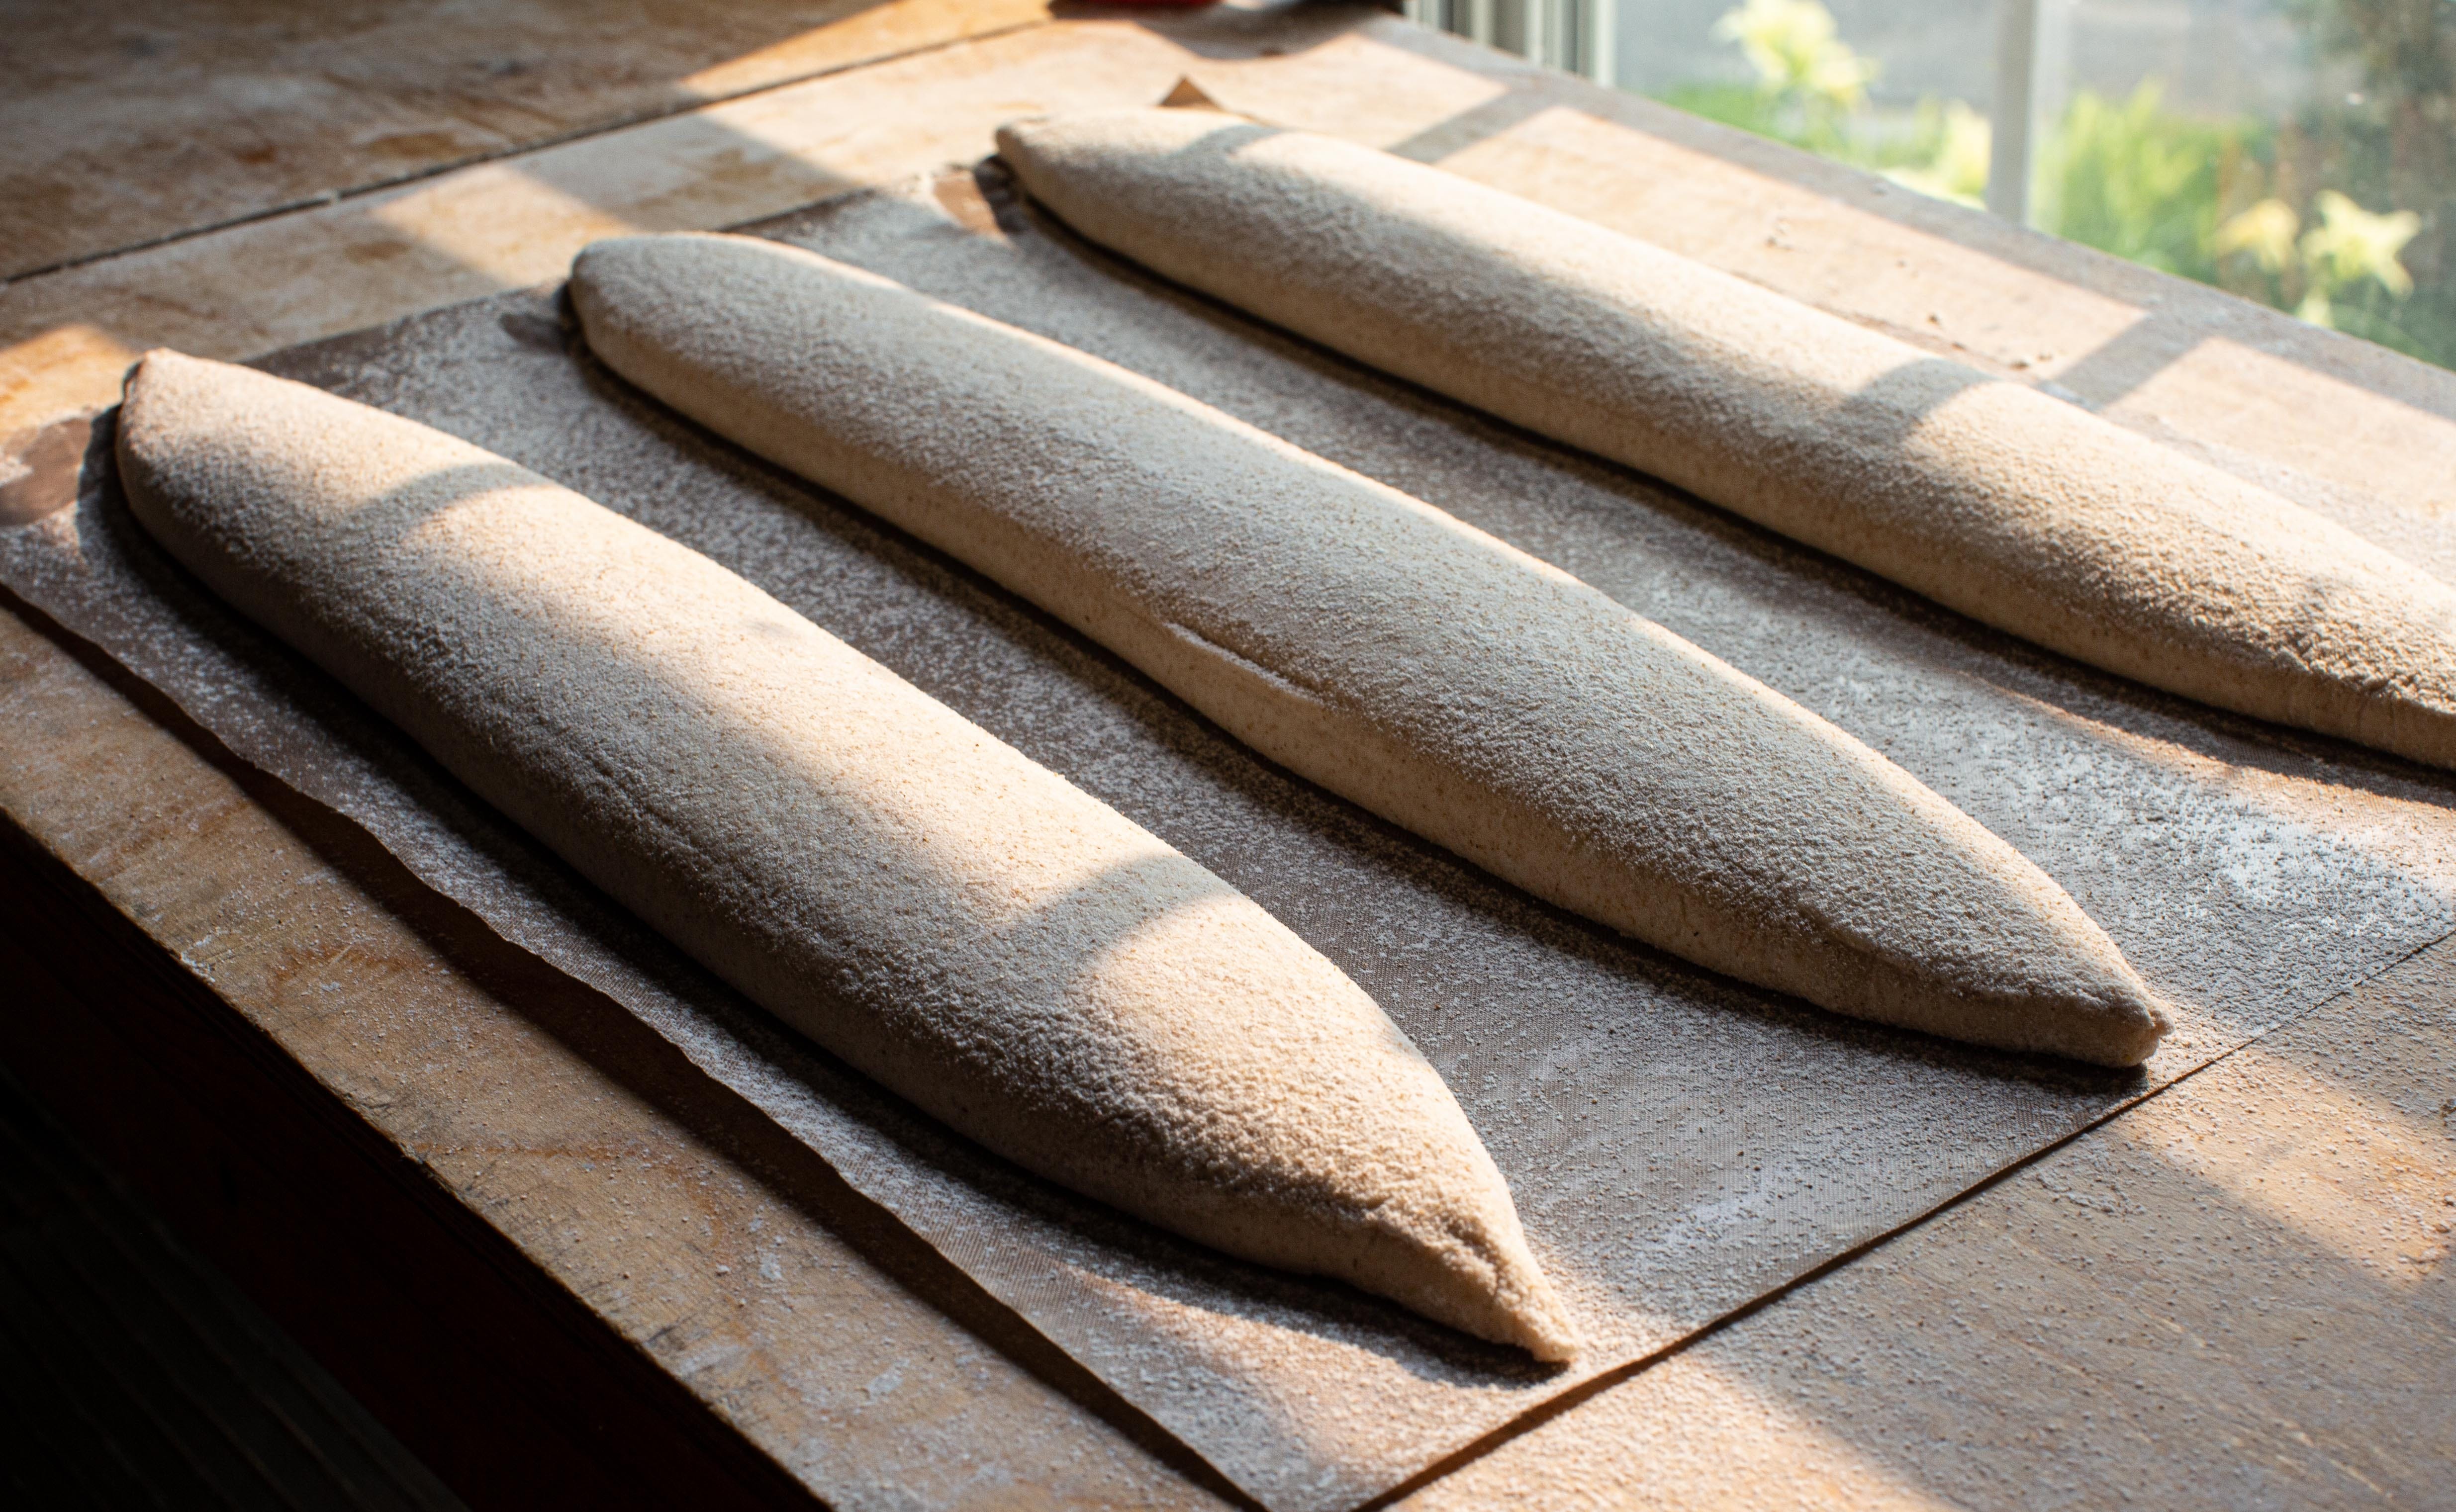 The good baguette - by Martin Philip - The Sassafras Curio